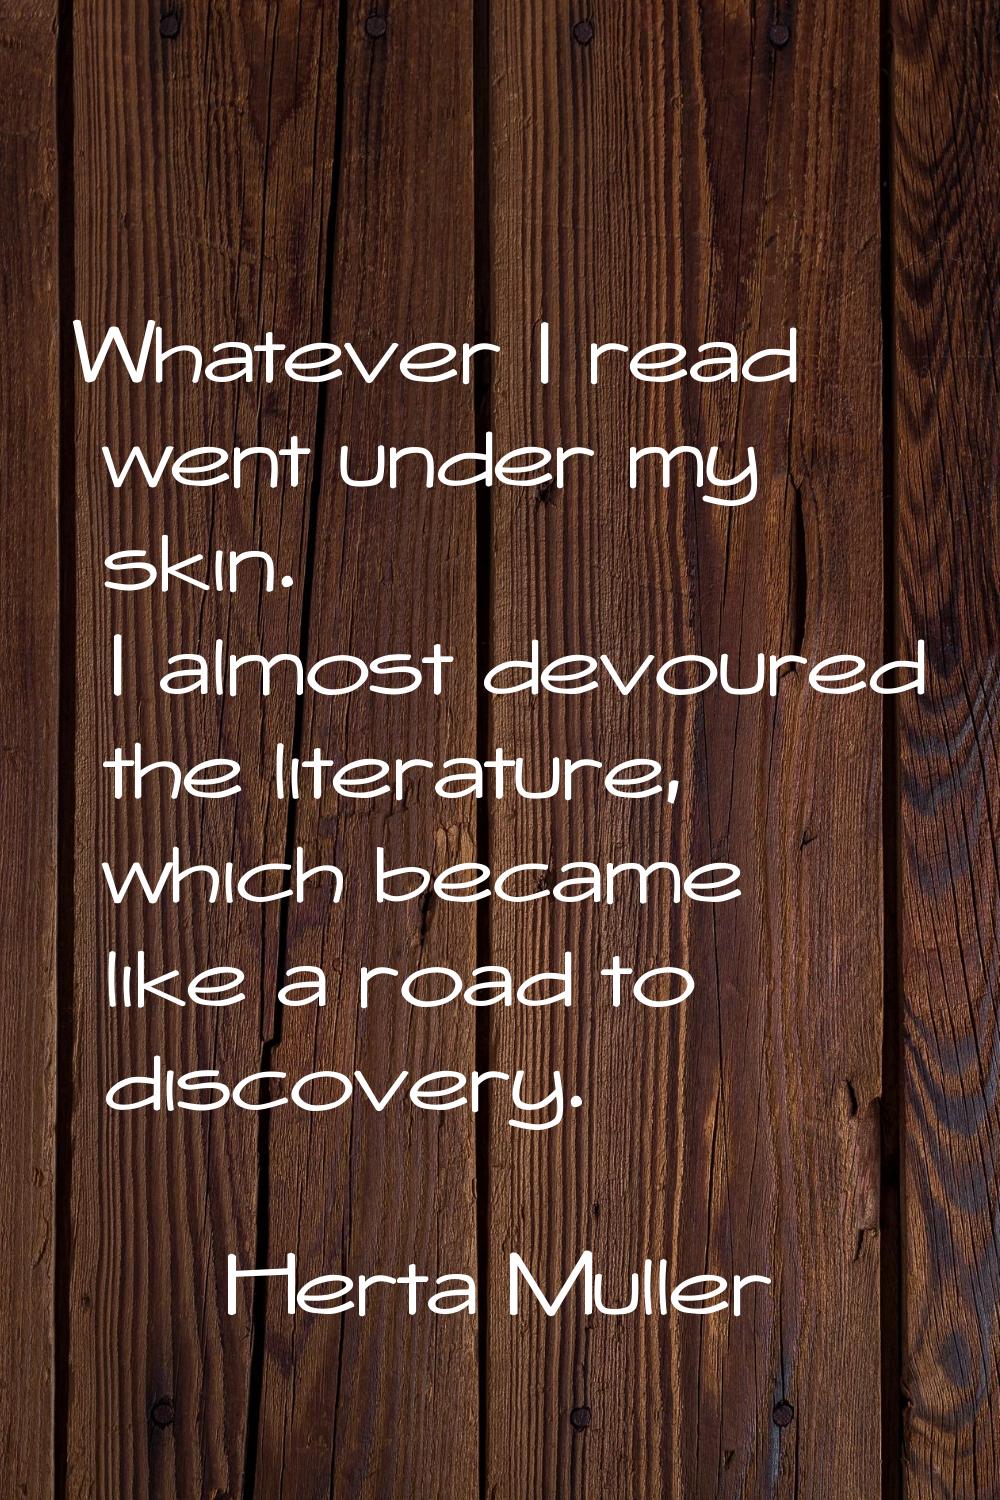 Whatever I read went under my skin. I almost devoured the literature, which became like a road to d